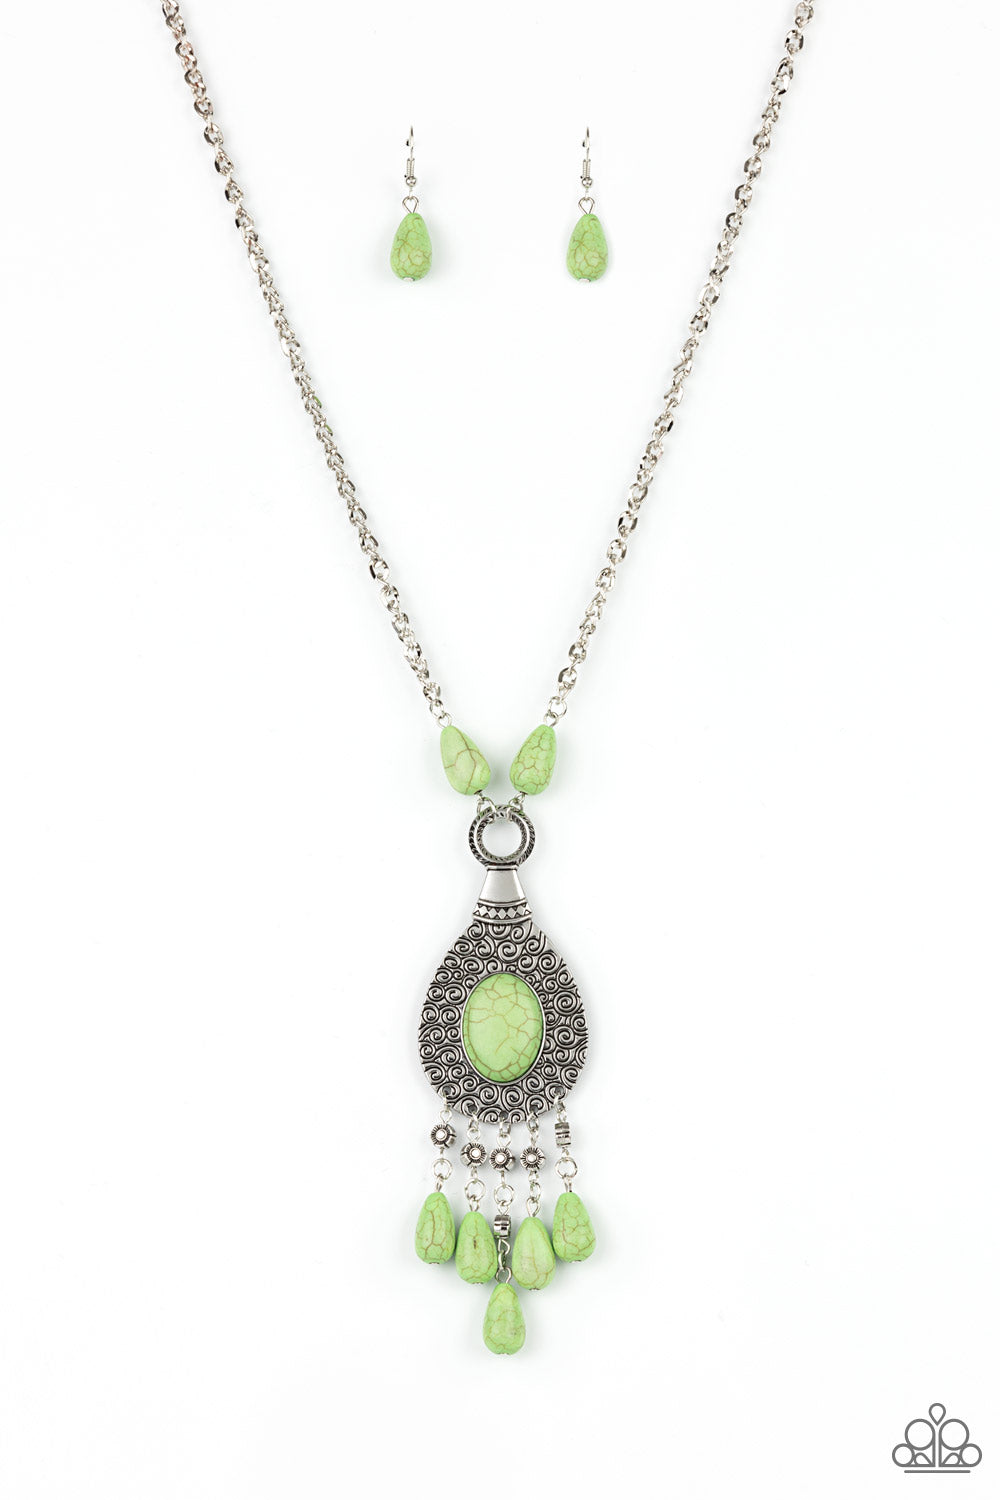 Cowgirl Couture - Green Necklace - Paparazzi Accessories